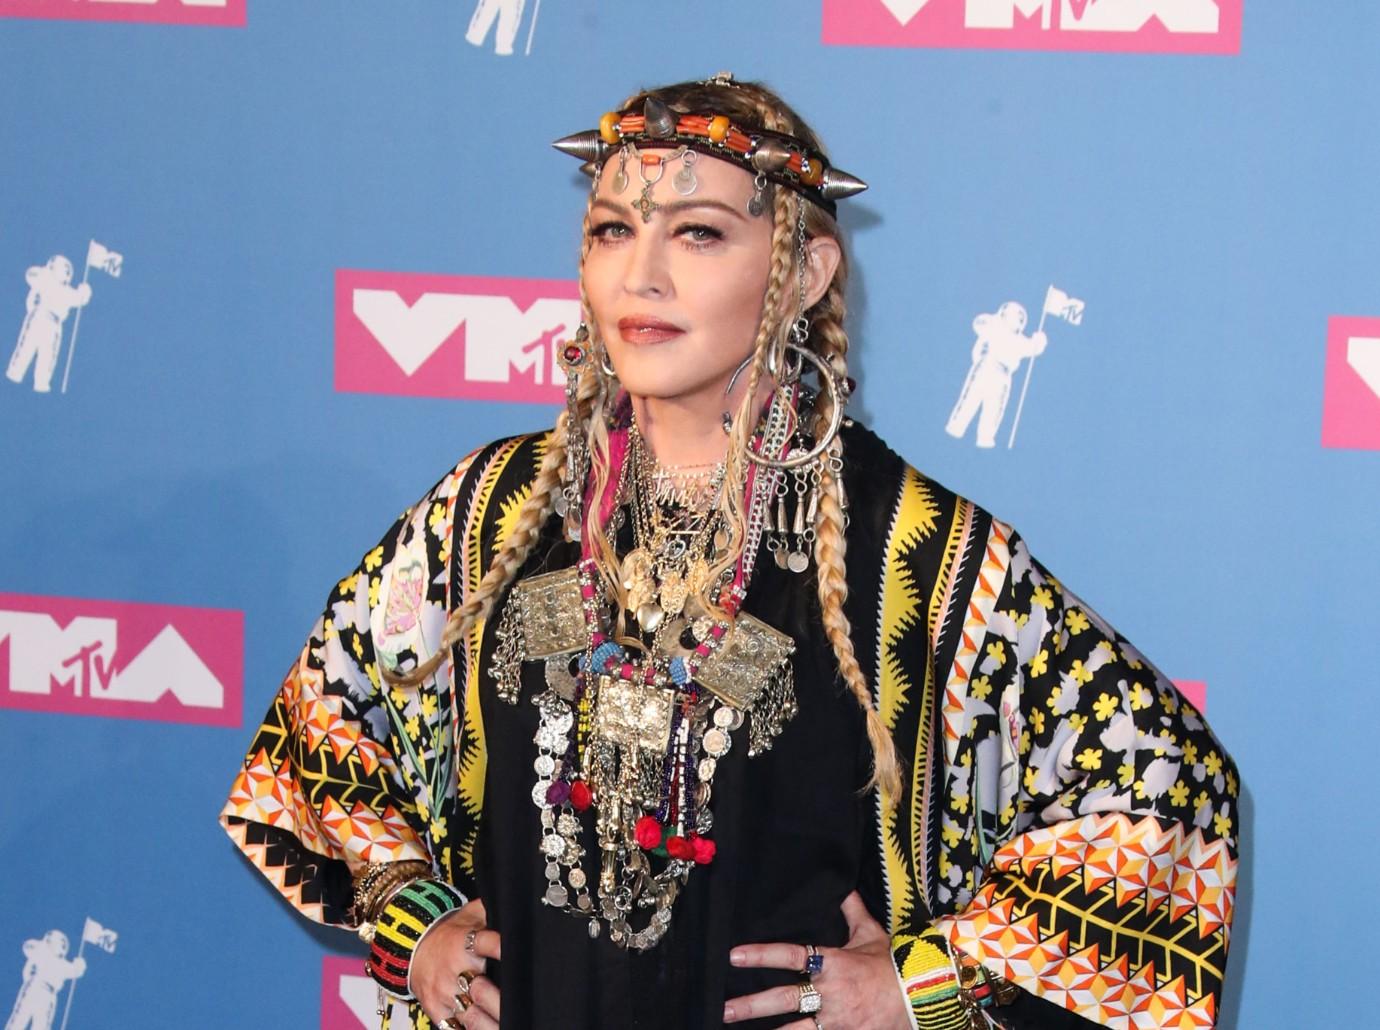 Madonna to bring back iconic cone bra for 2023 Celebration Tour